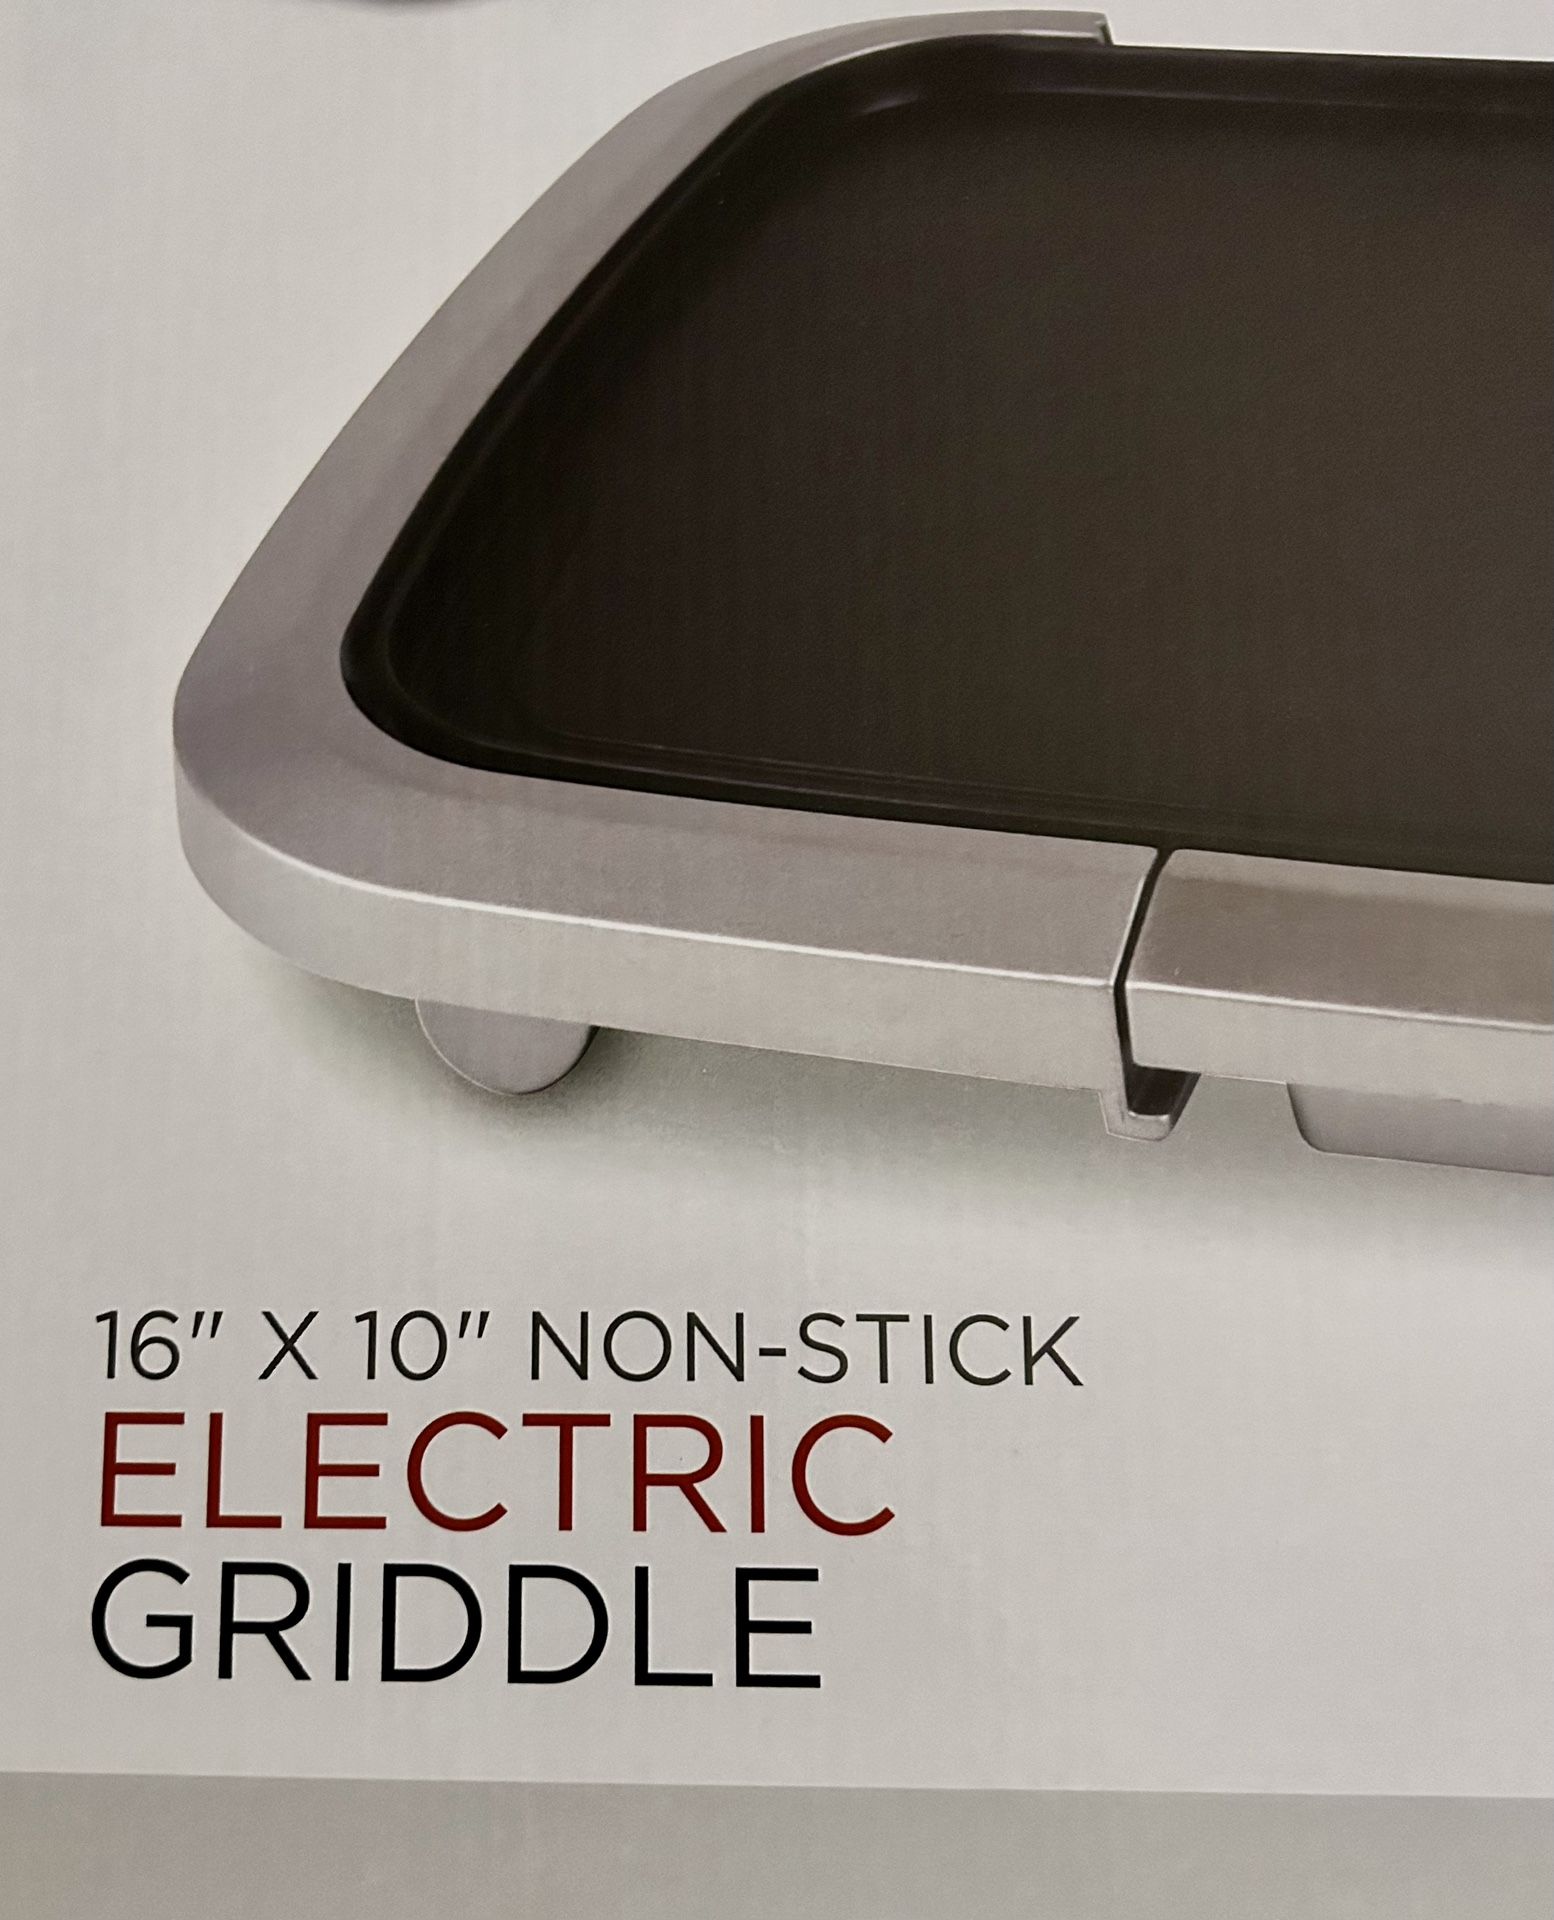 BRAND NEW! ELECTRIC GRIDDLE 